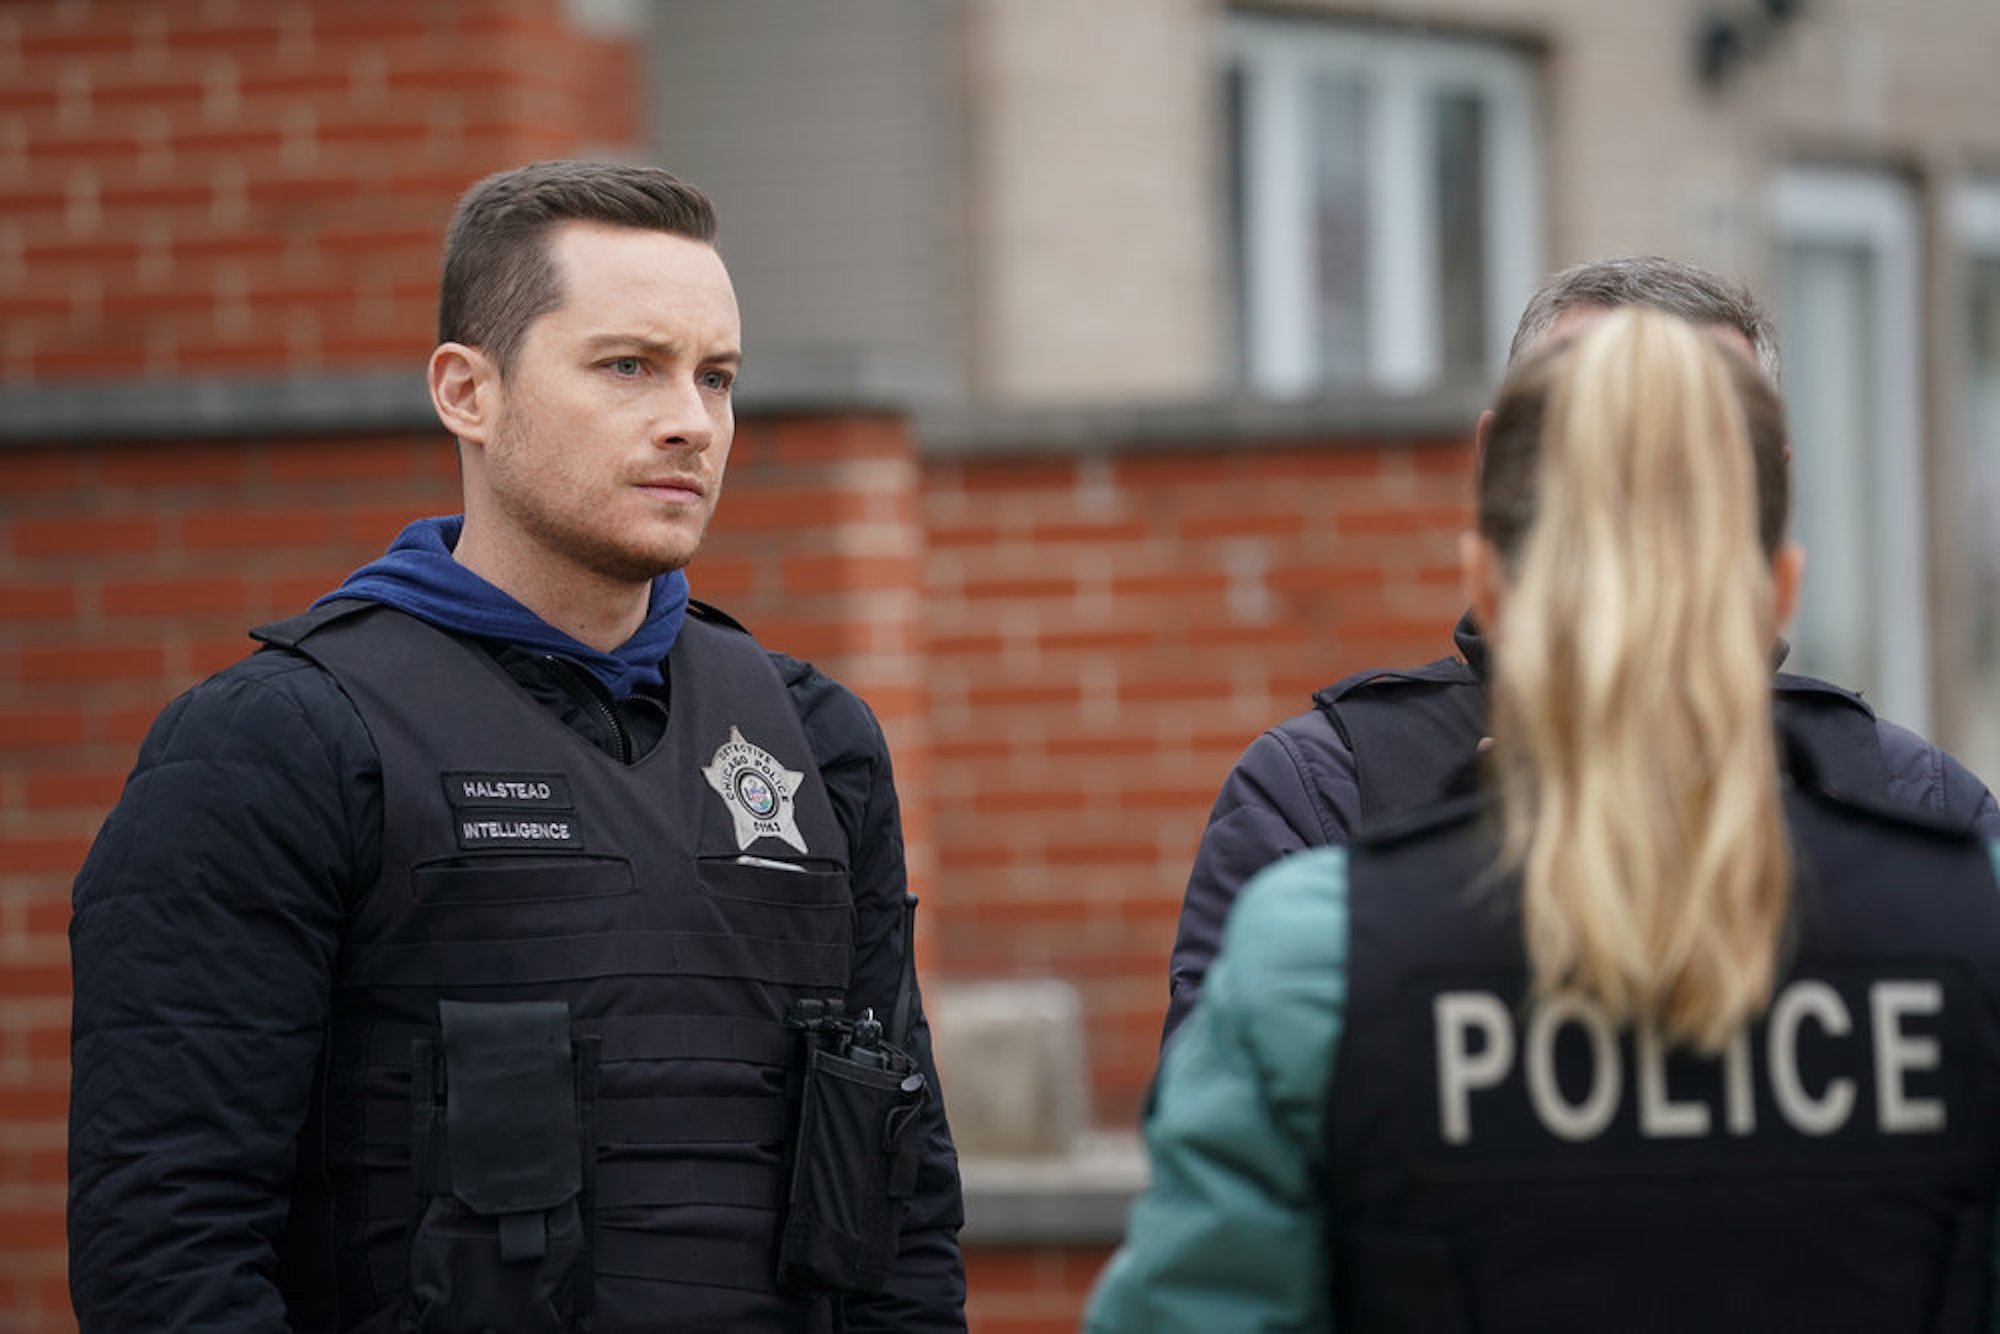 Jay Halstead talking to Hailey Upton outside in 'Chicago P.D.' Season 9 Episode 13